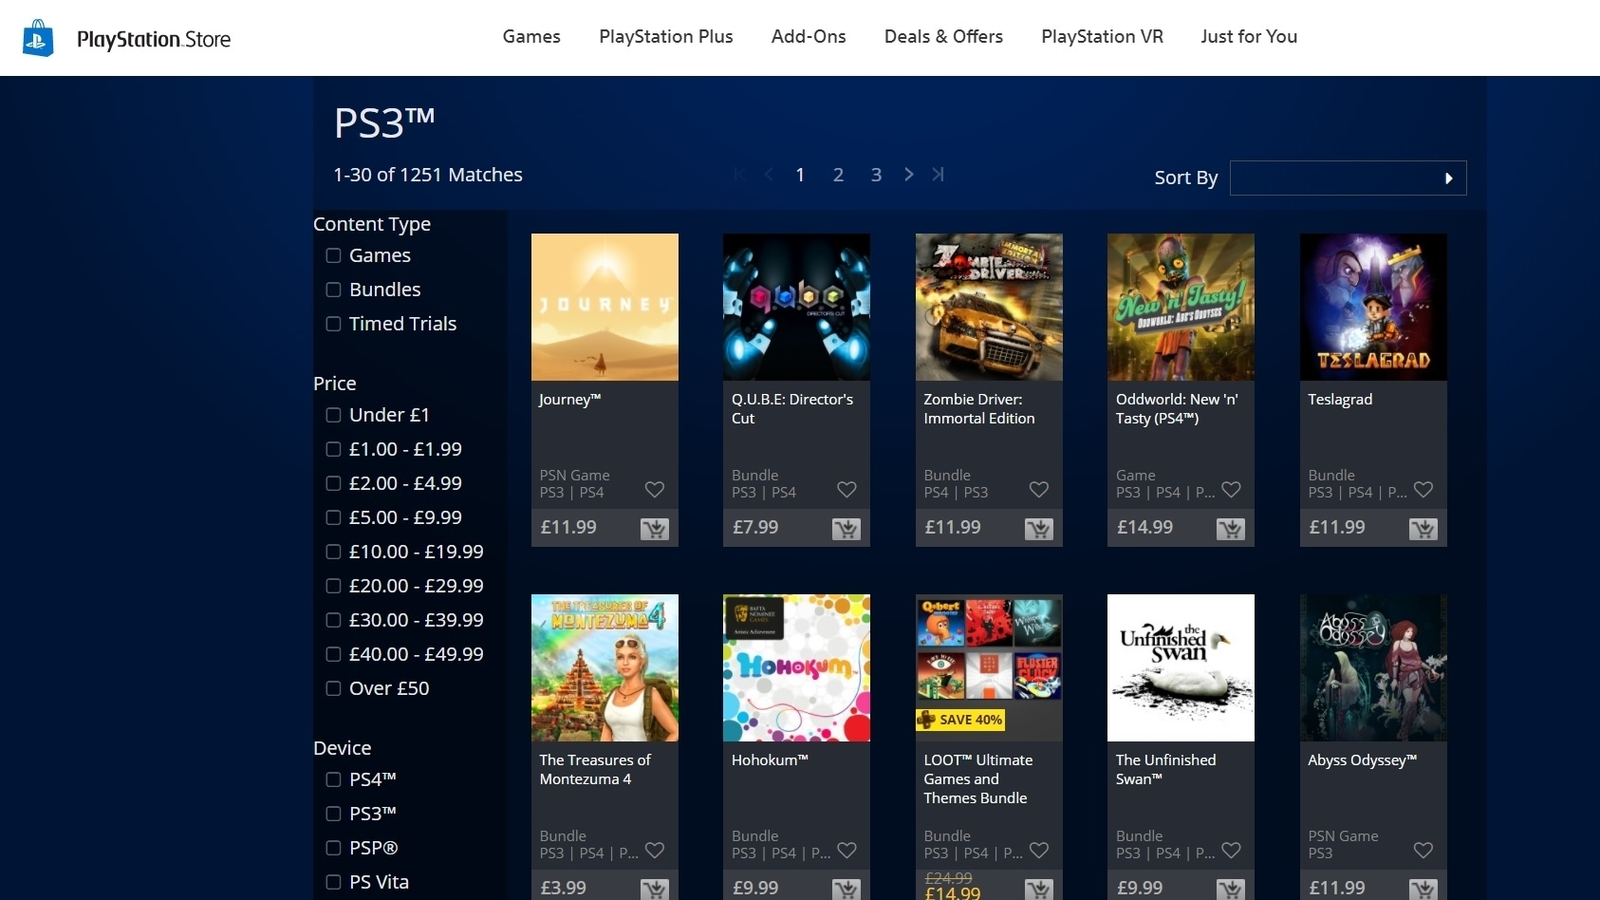 PlayStation Store on web and mobile to stop selling PSP Vita games this Eurogamer.net